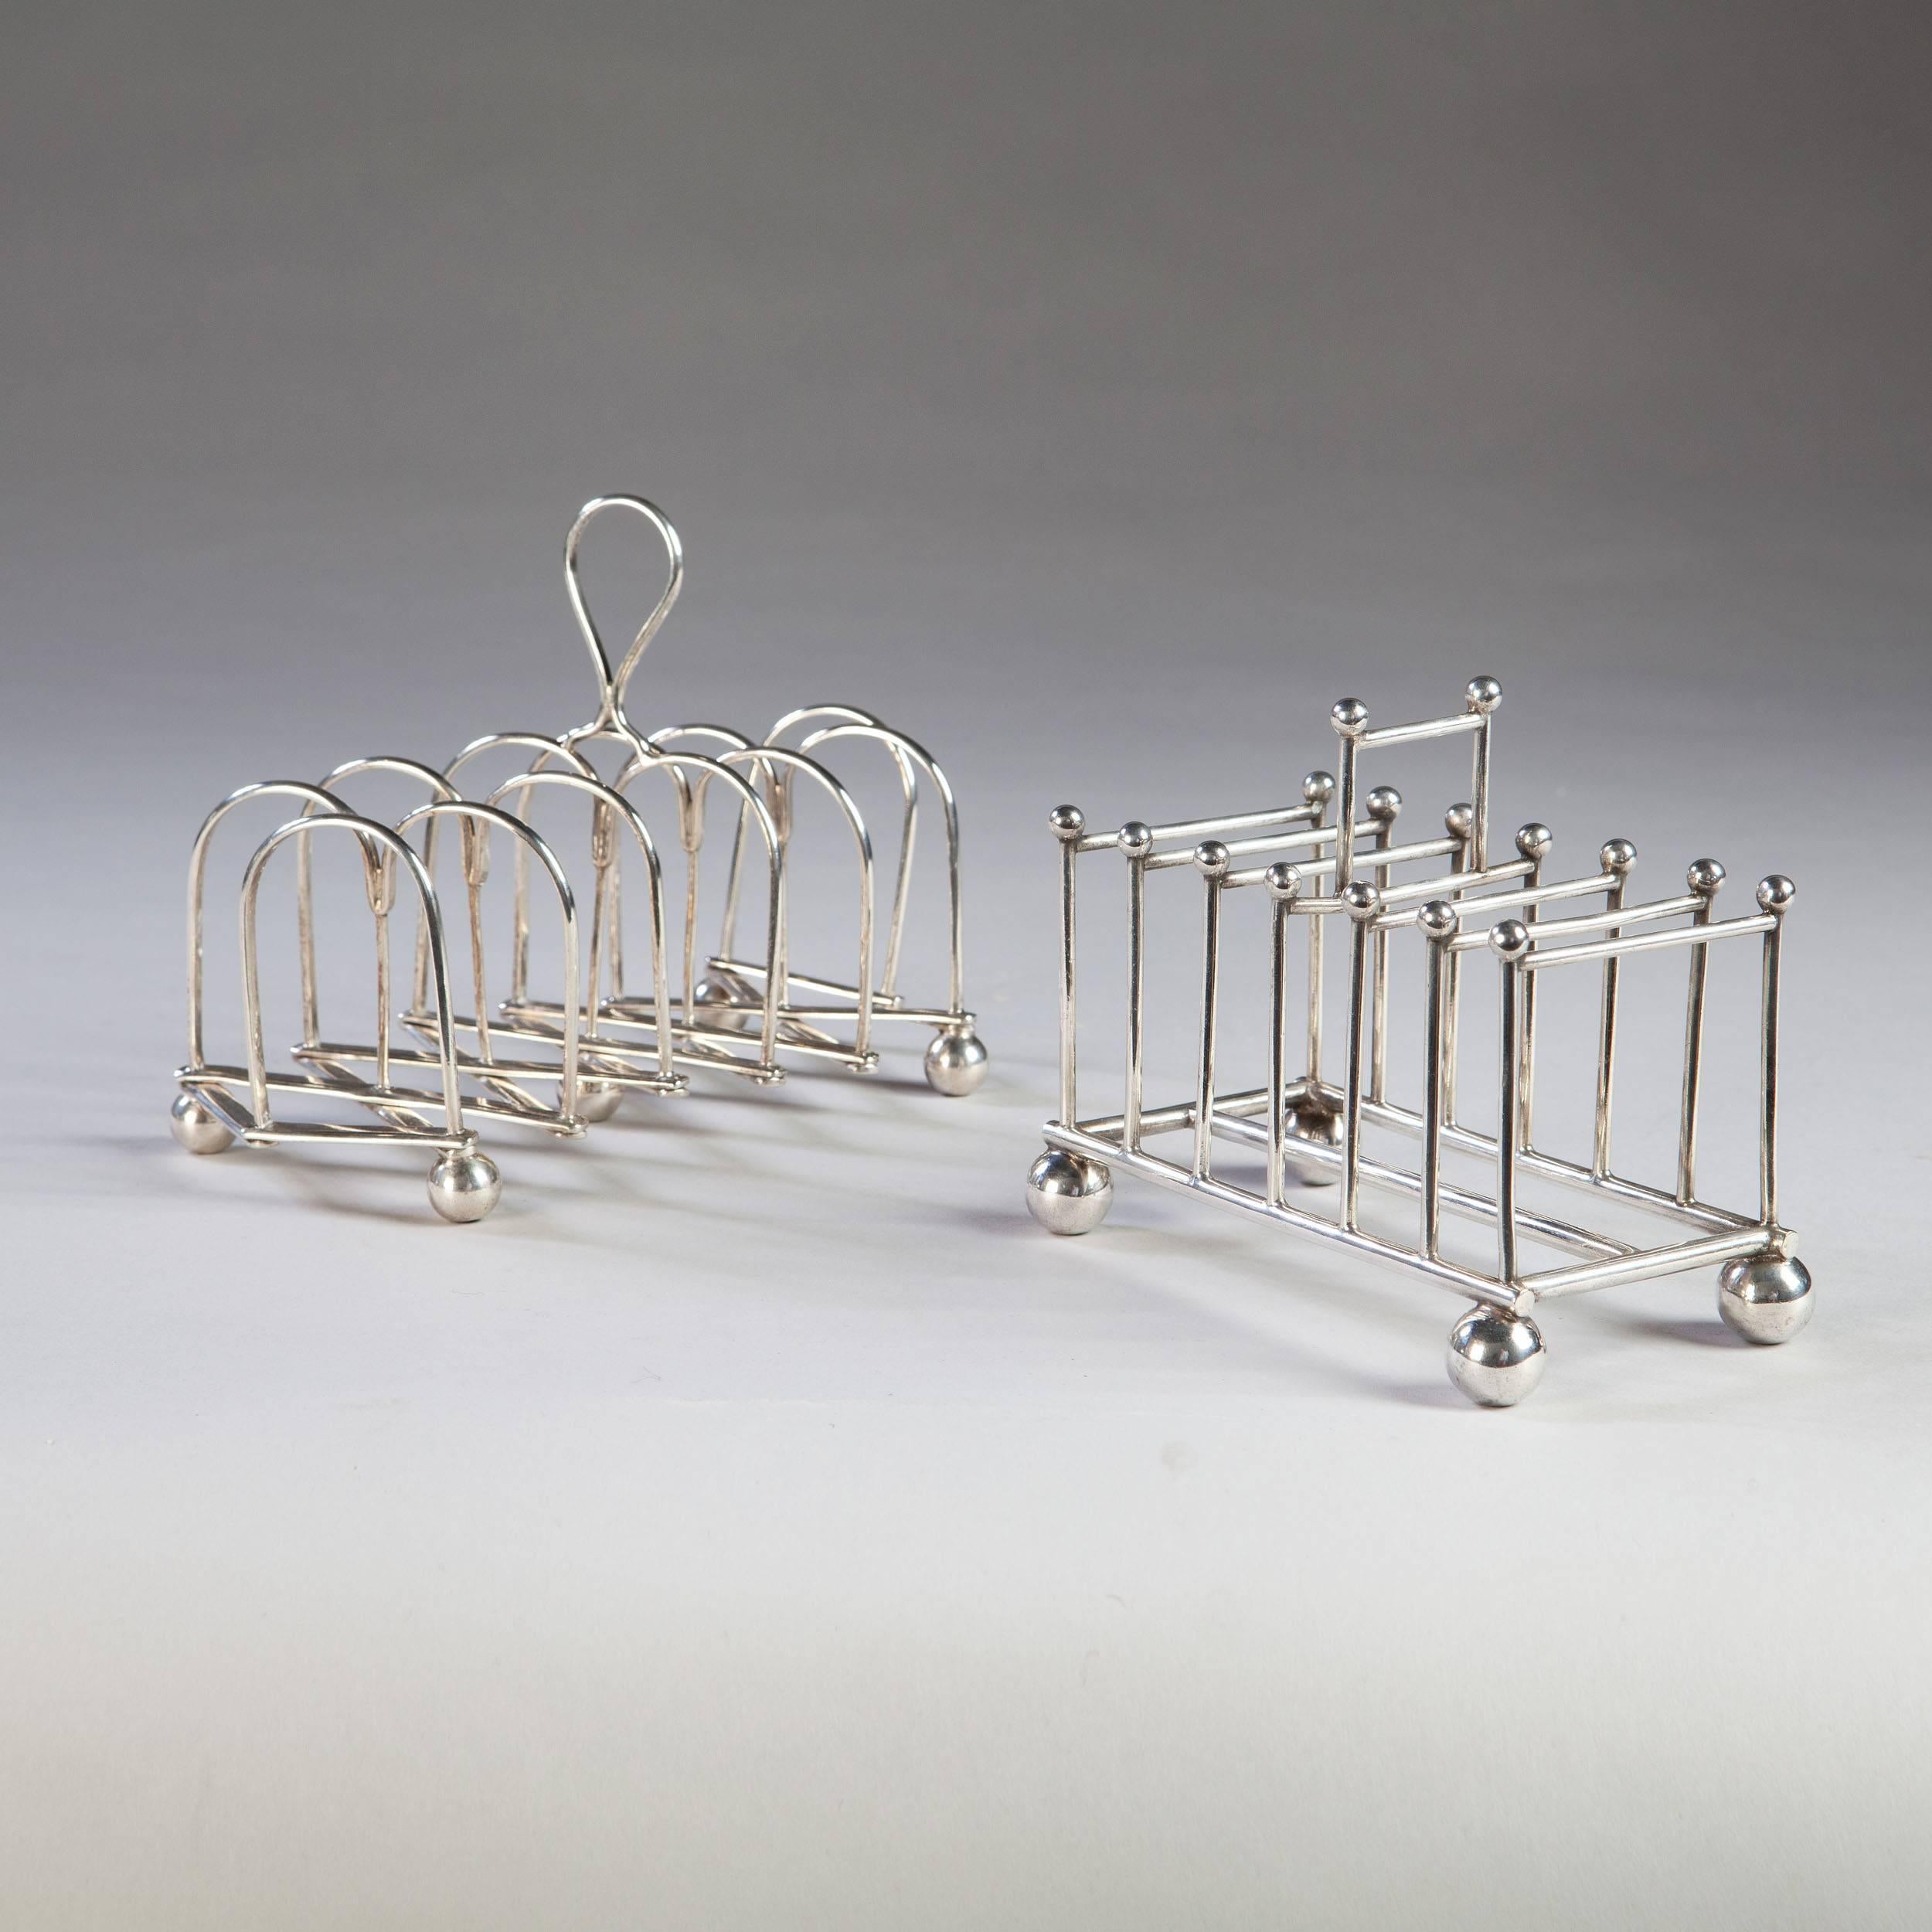 English Silver Plated Toast Rack Attributed to Christopher Dresser